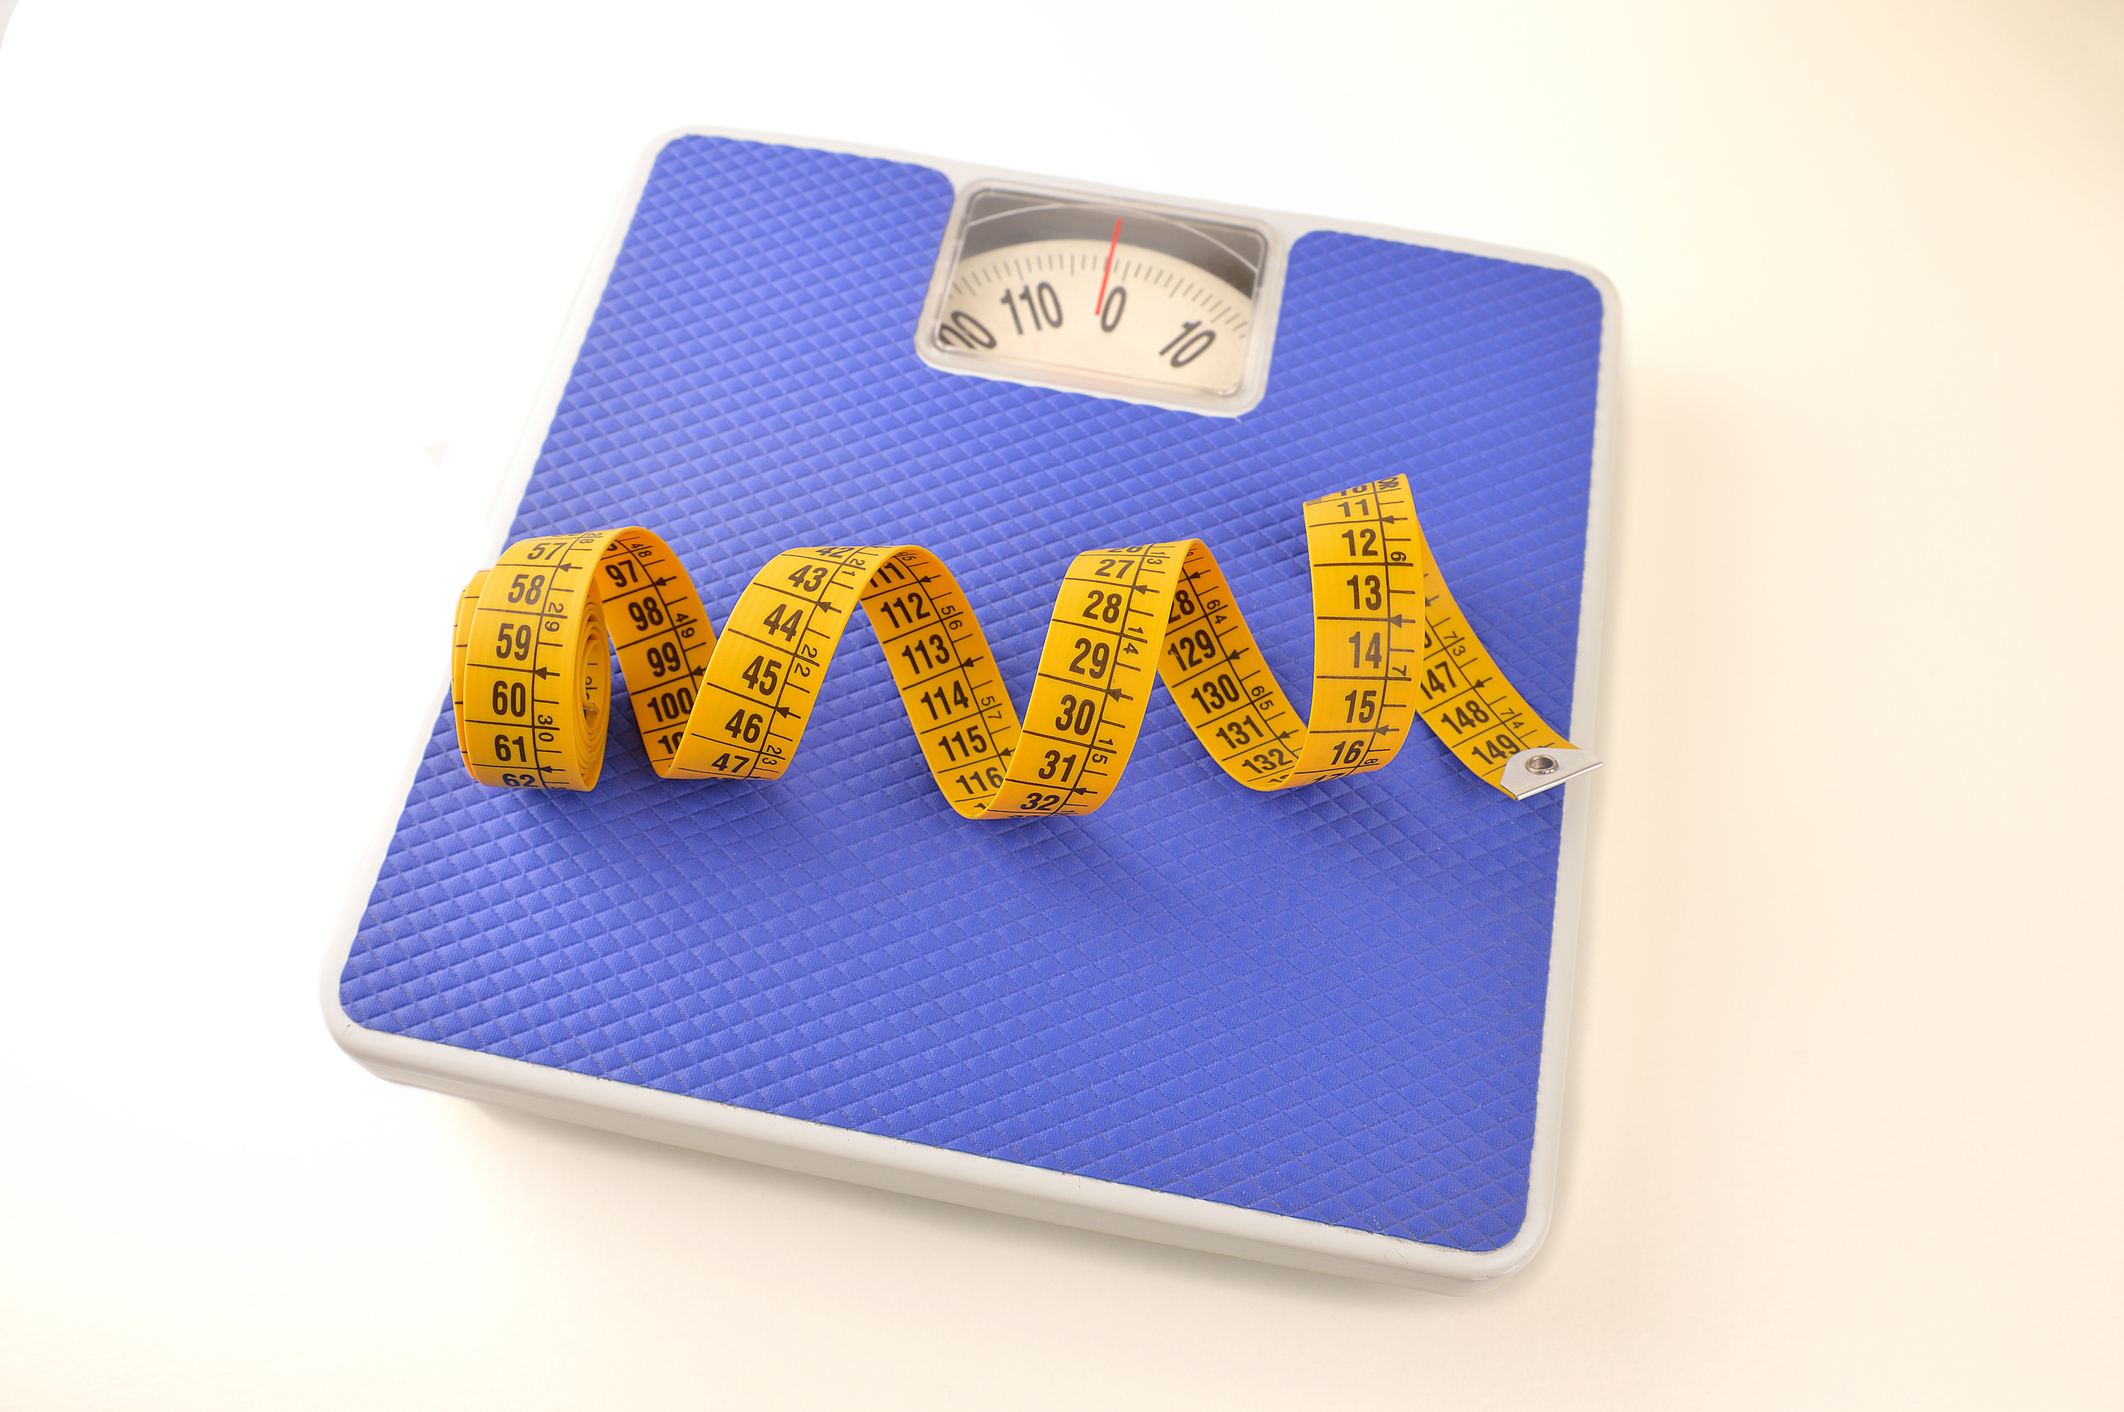 Goodbye BMI: Doctors Suggest a New Approach to Calculate Your Health